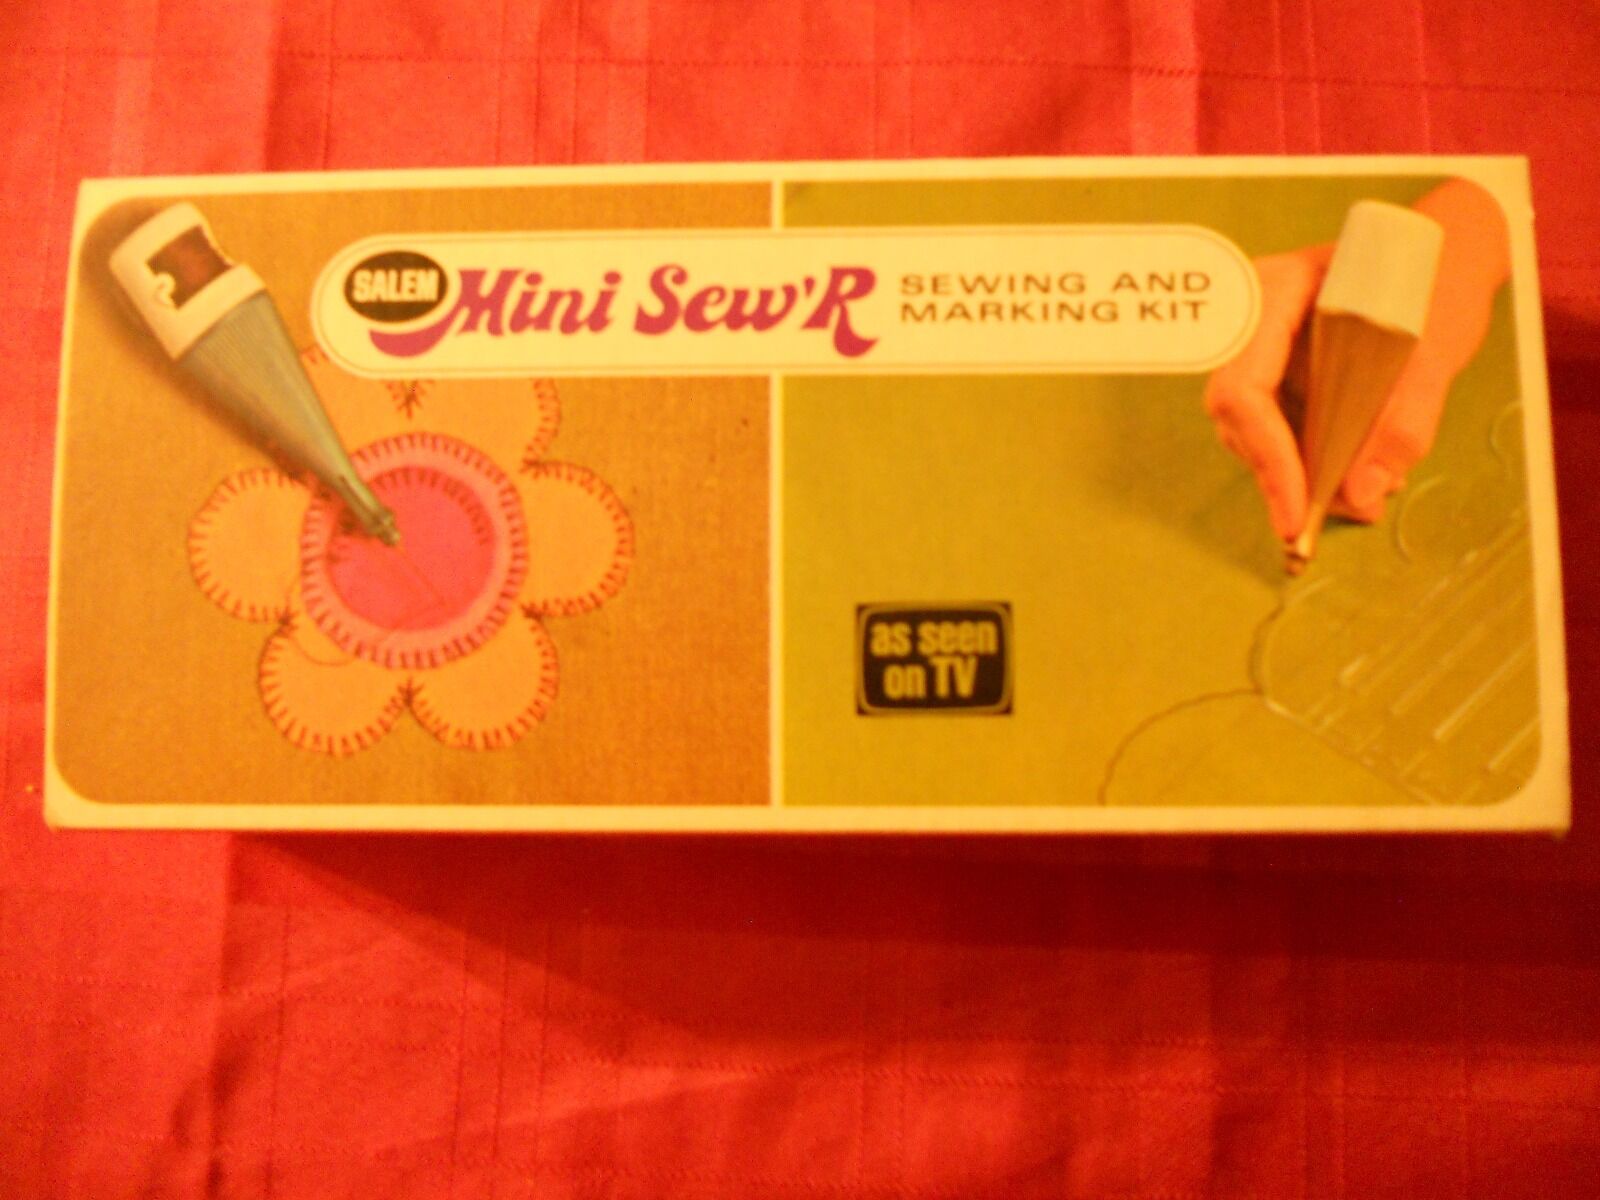 Vintage Salem Mini Sewer Sewing and Marking Kit seen on TV